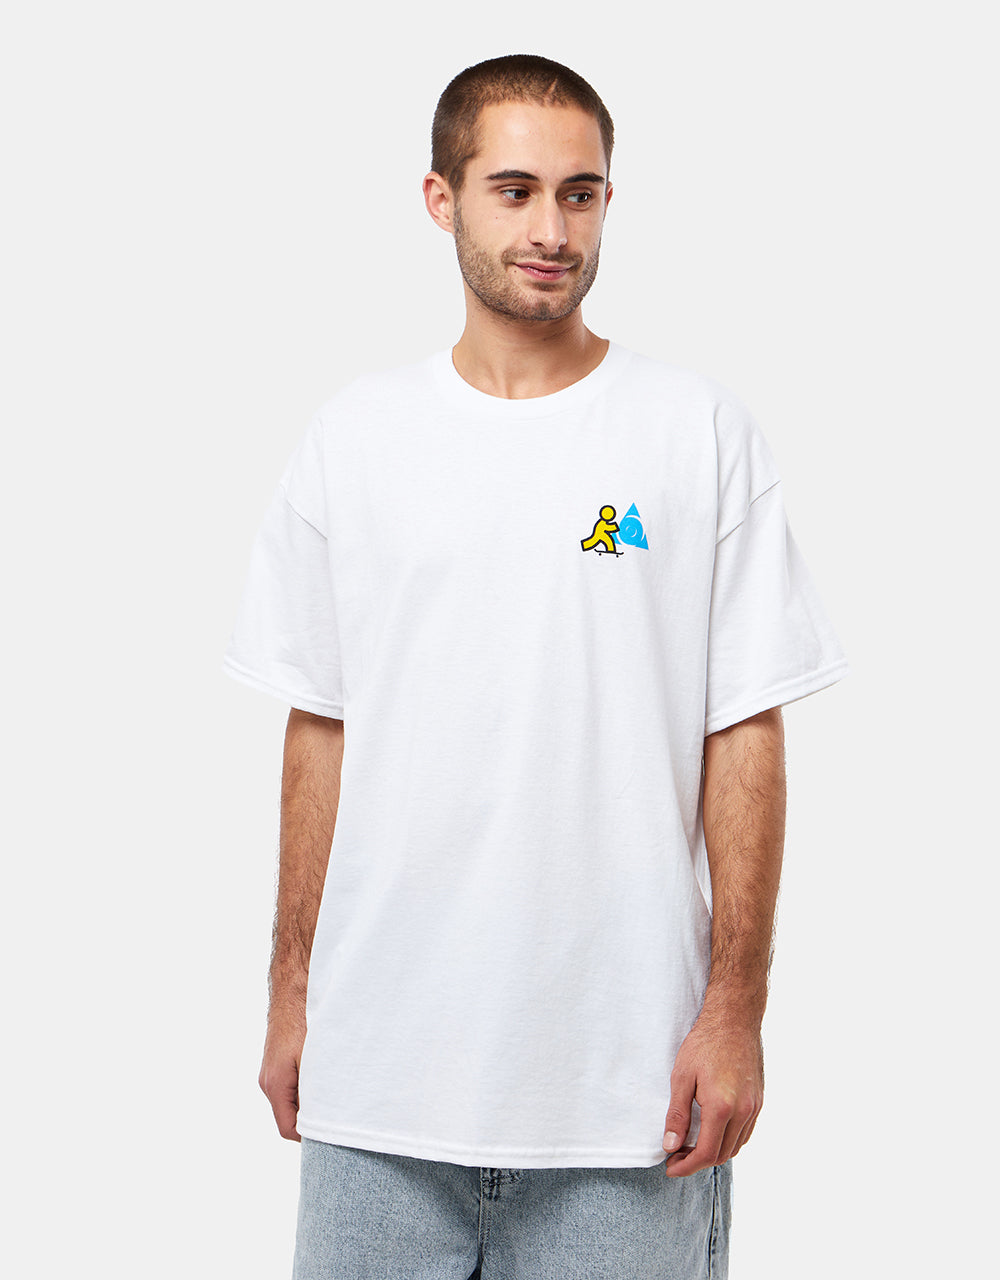 Route One Instant T-Shirt - White